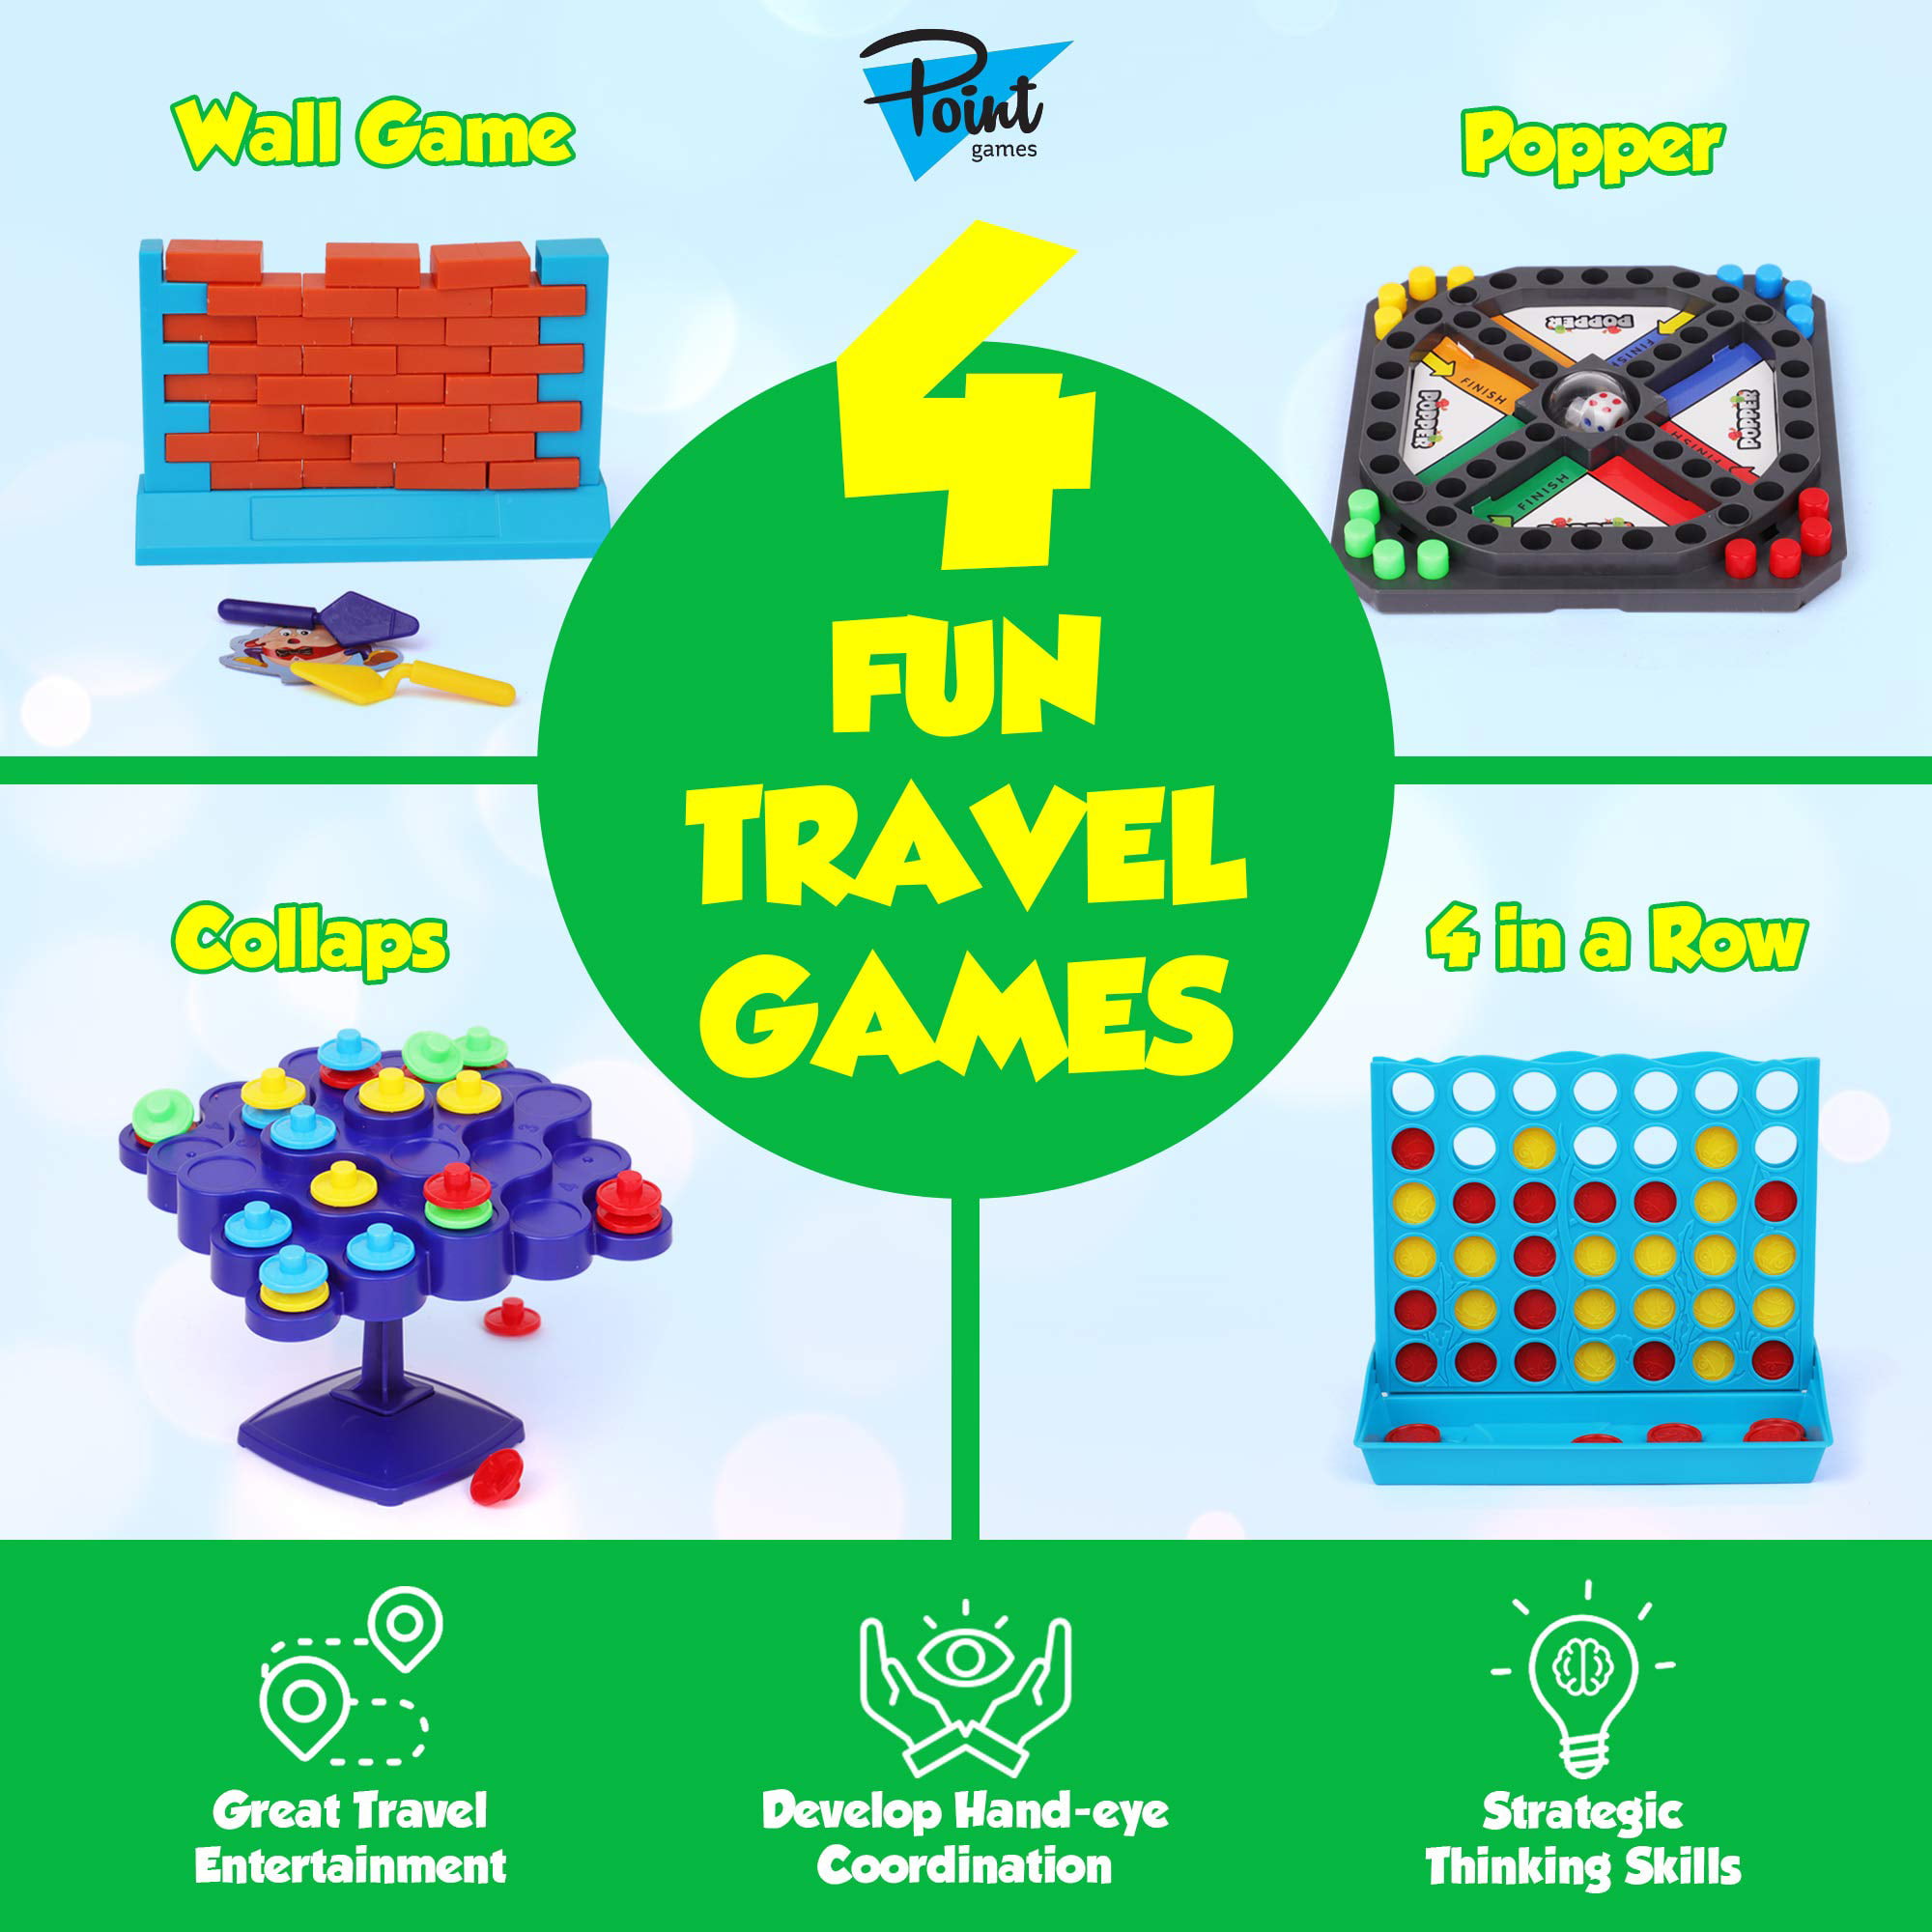 Our Favorite Travel Games for Kids - Home of Malones